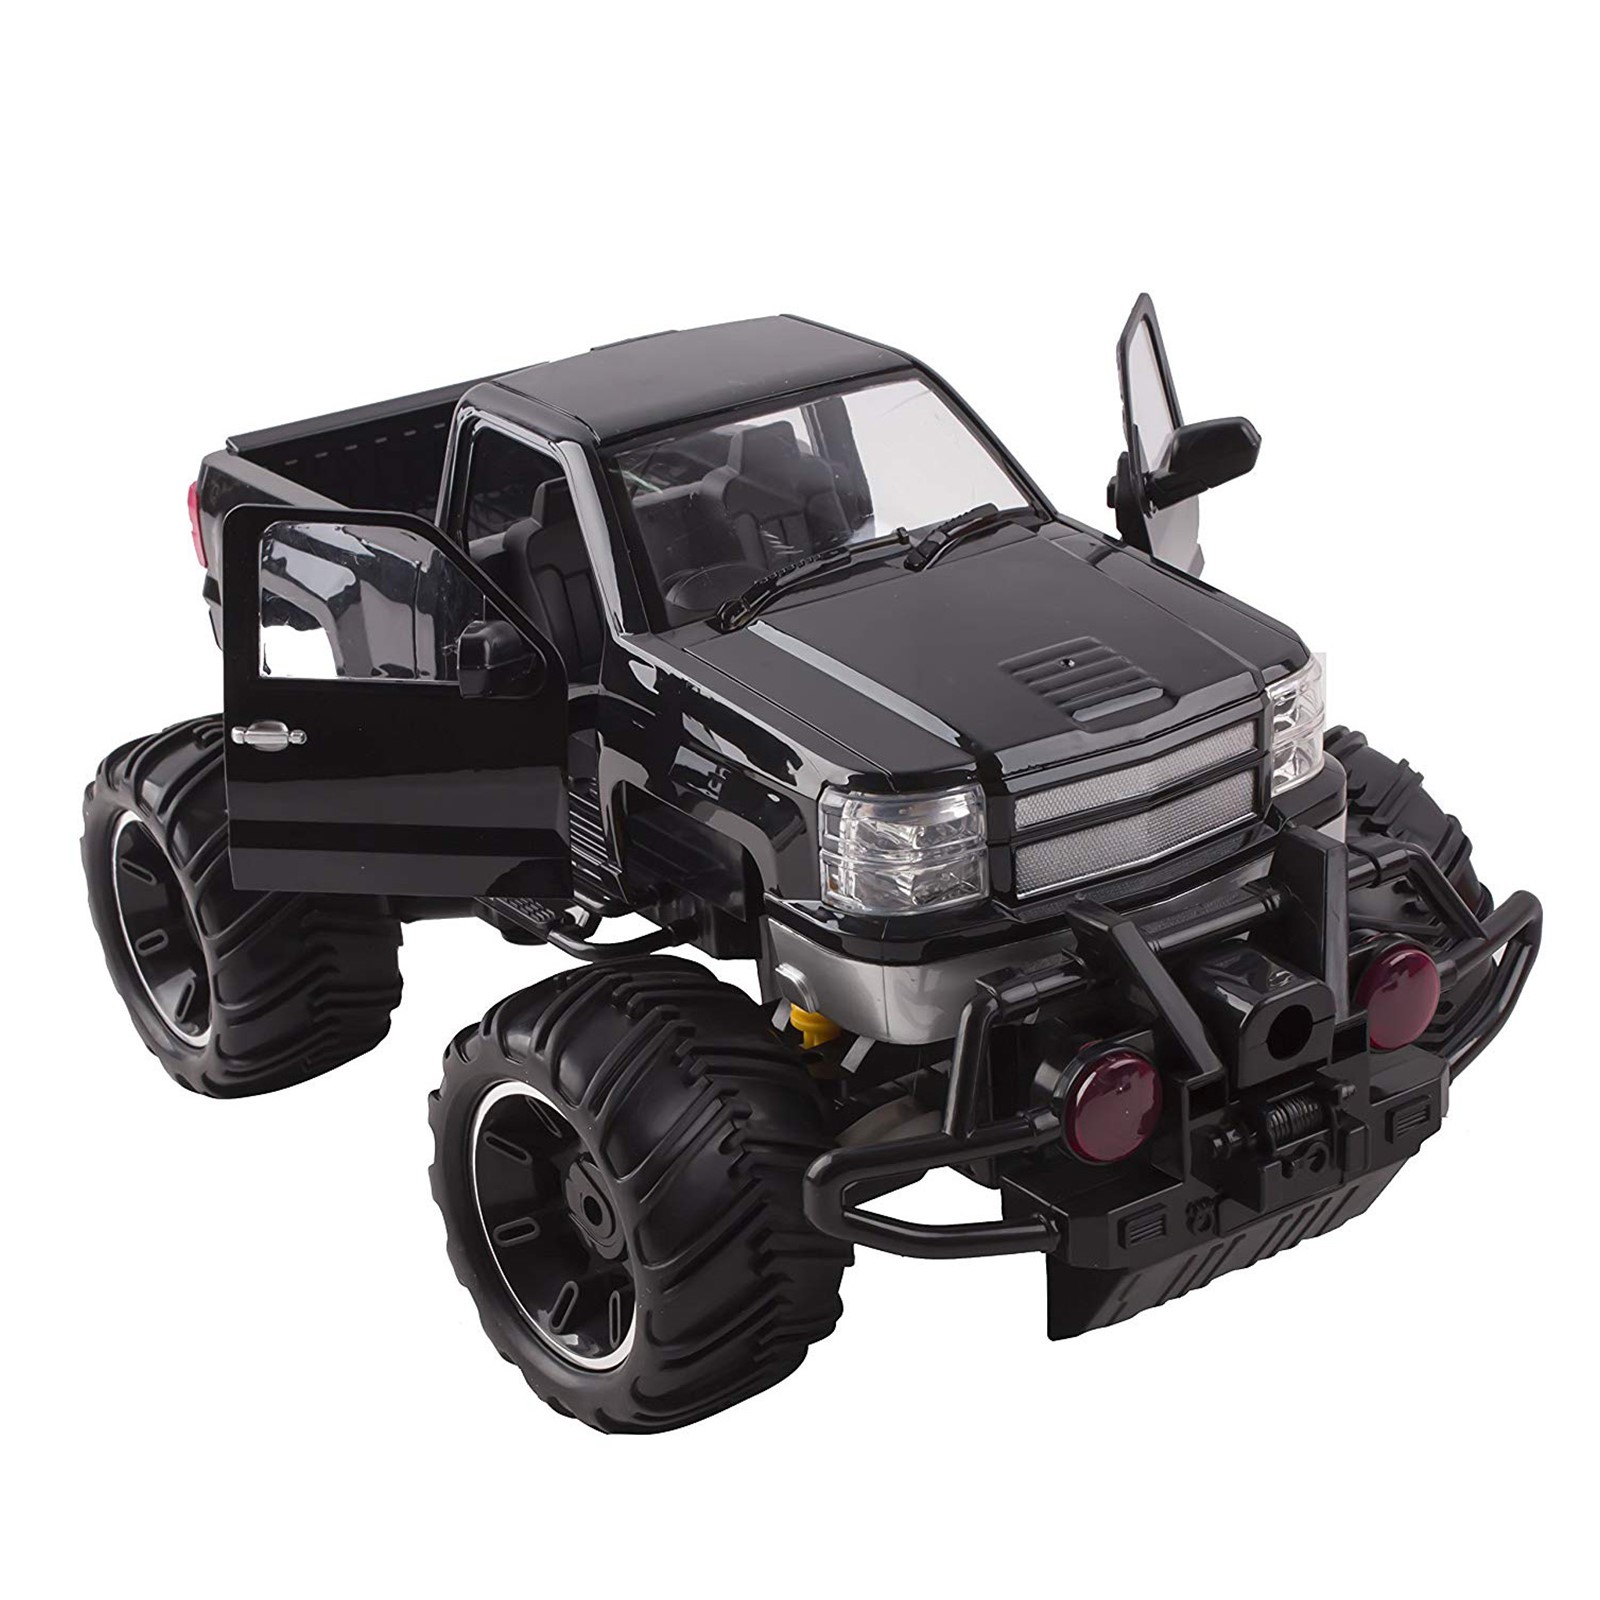 Big Wheel Beast RC Monster Truck Remote Control Doors Opening Car Light Up LED Headlights Ready to Run INCLUDES RECHARGEABLE BATTERY 1:14 Size Off-Road Pick Up Buggy Toy (Black) 666-631A